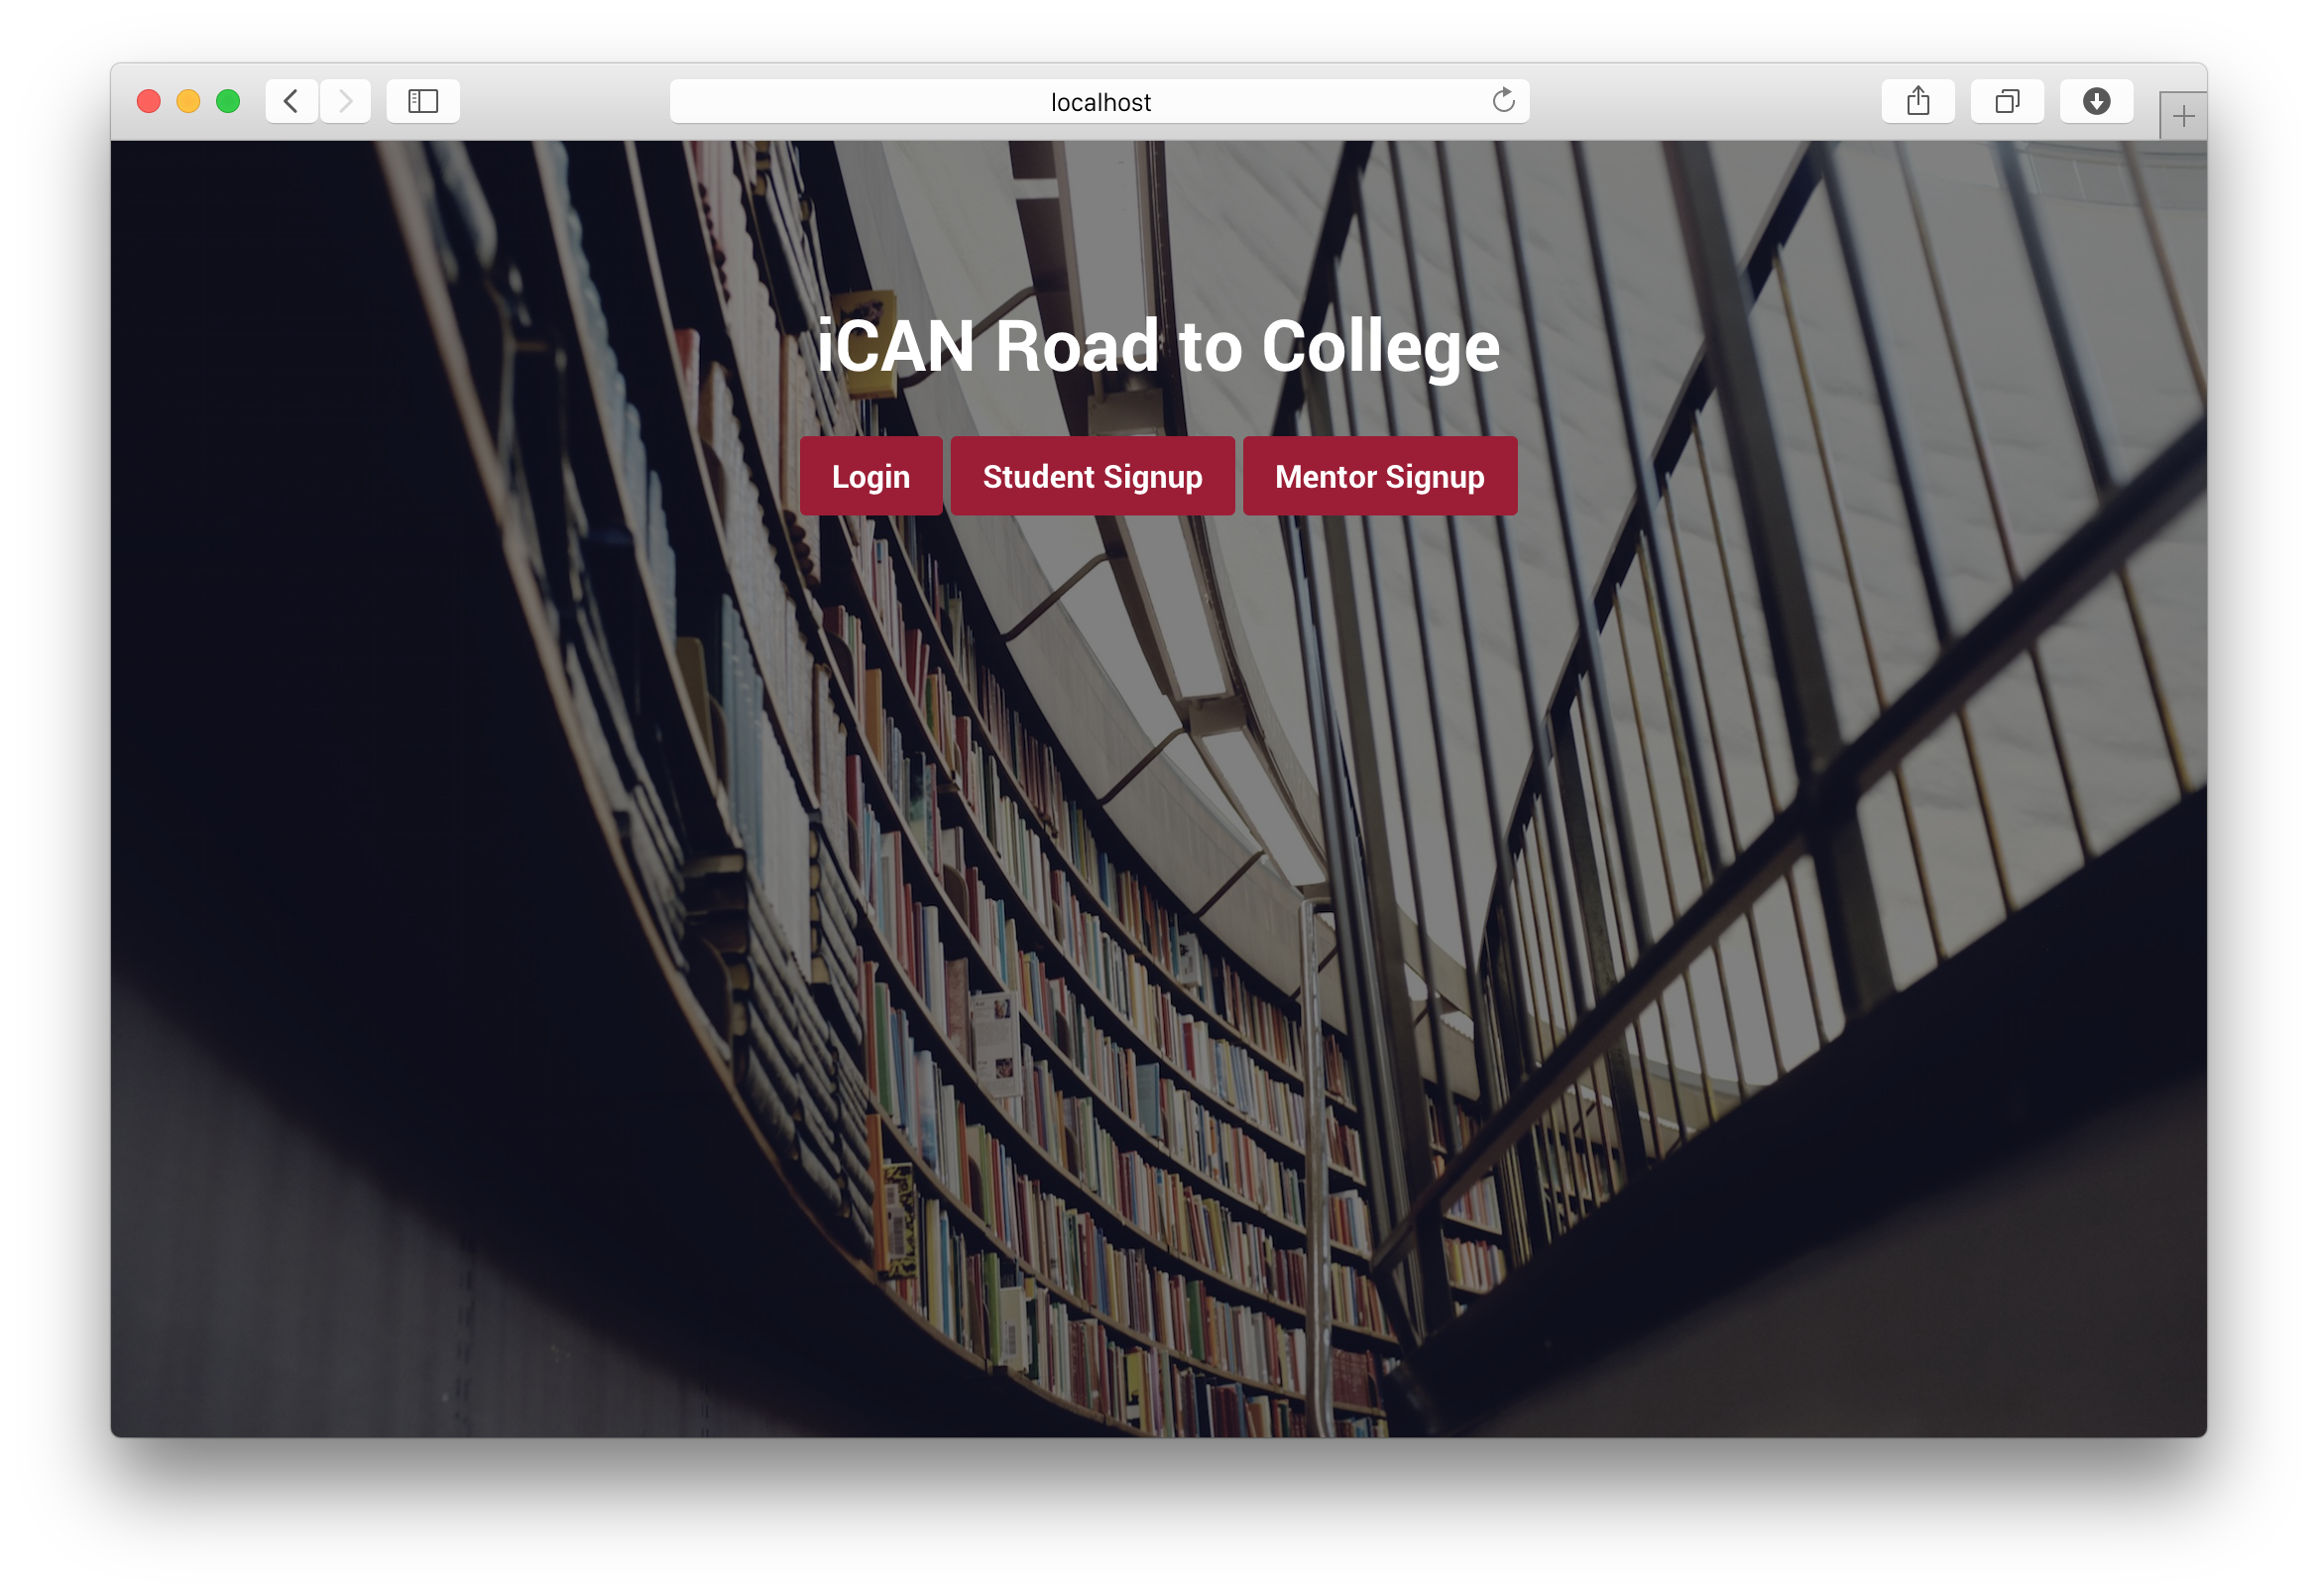 iCAN Road to College: Login, Student Signup, Mentor Signup